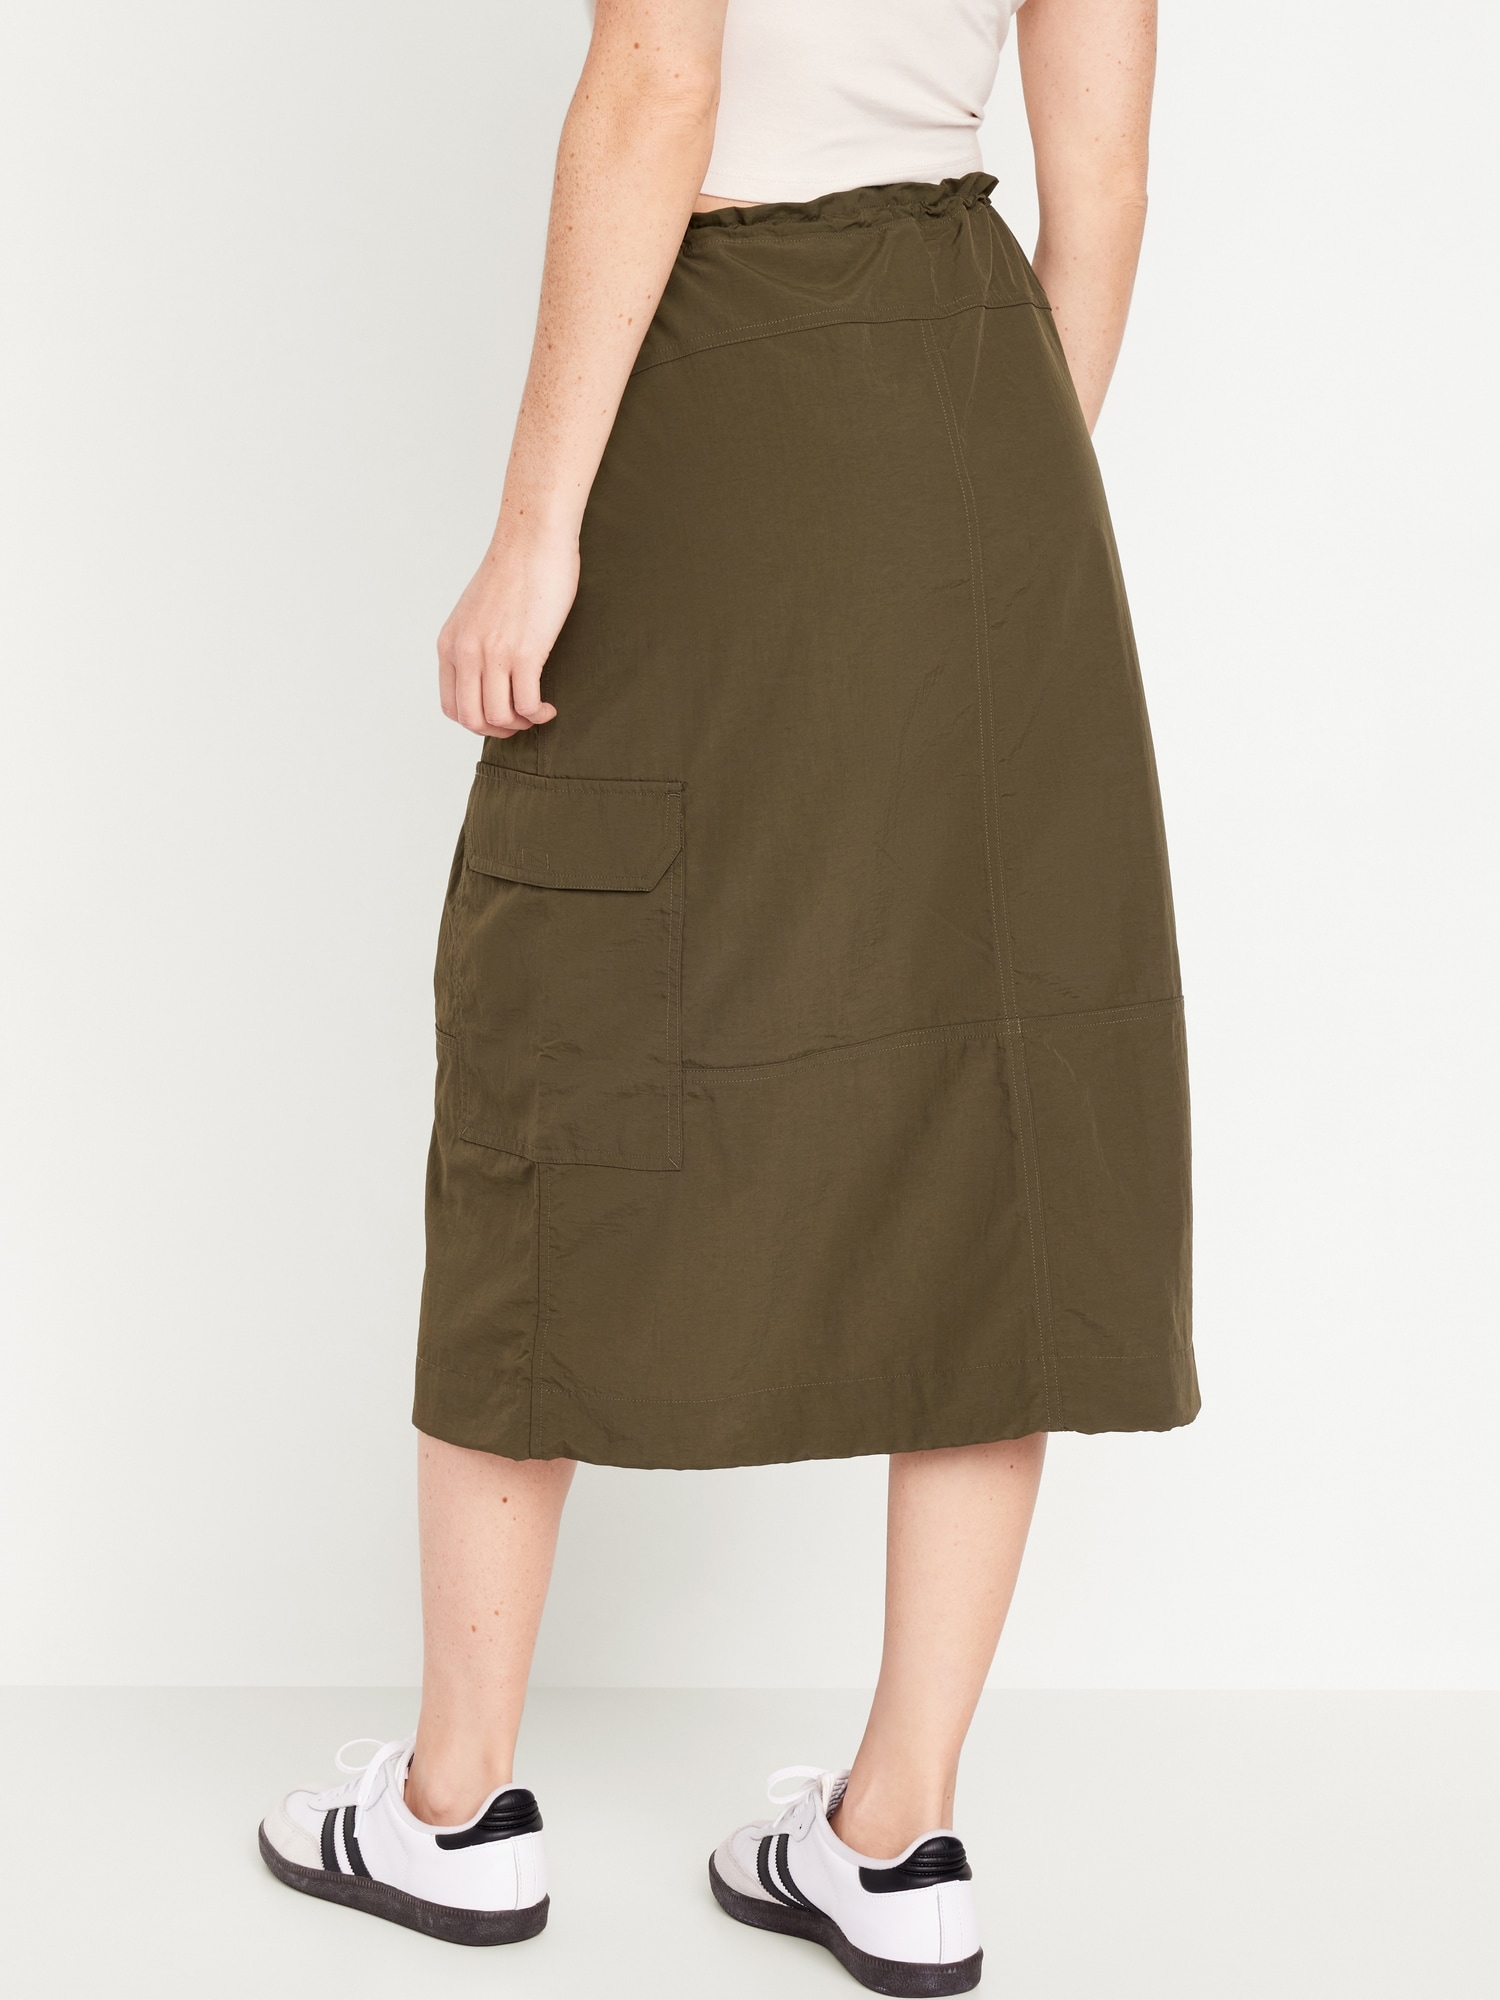 The Solid High Waisted A-line Midi Skirt